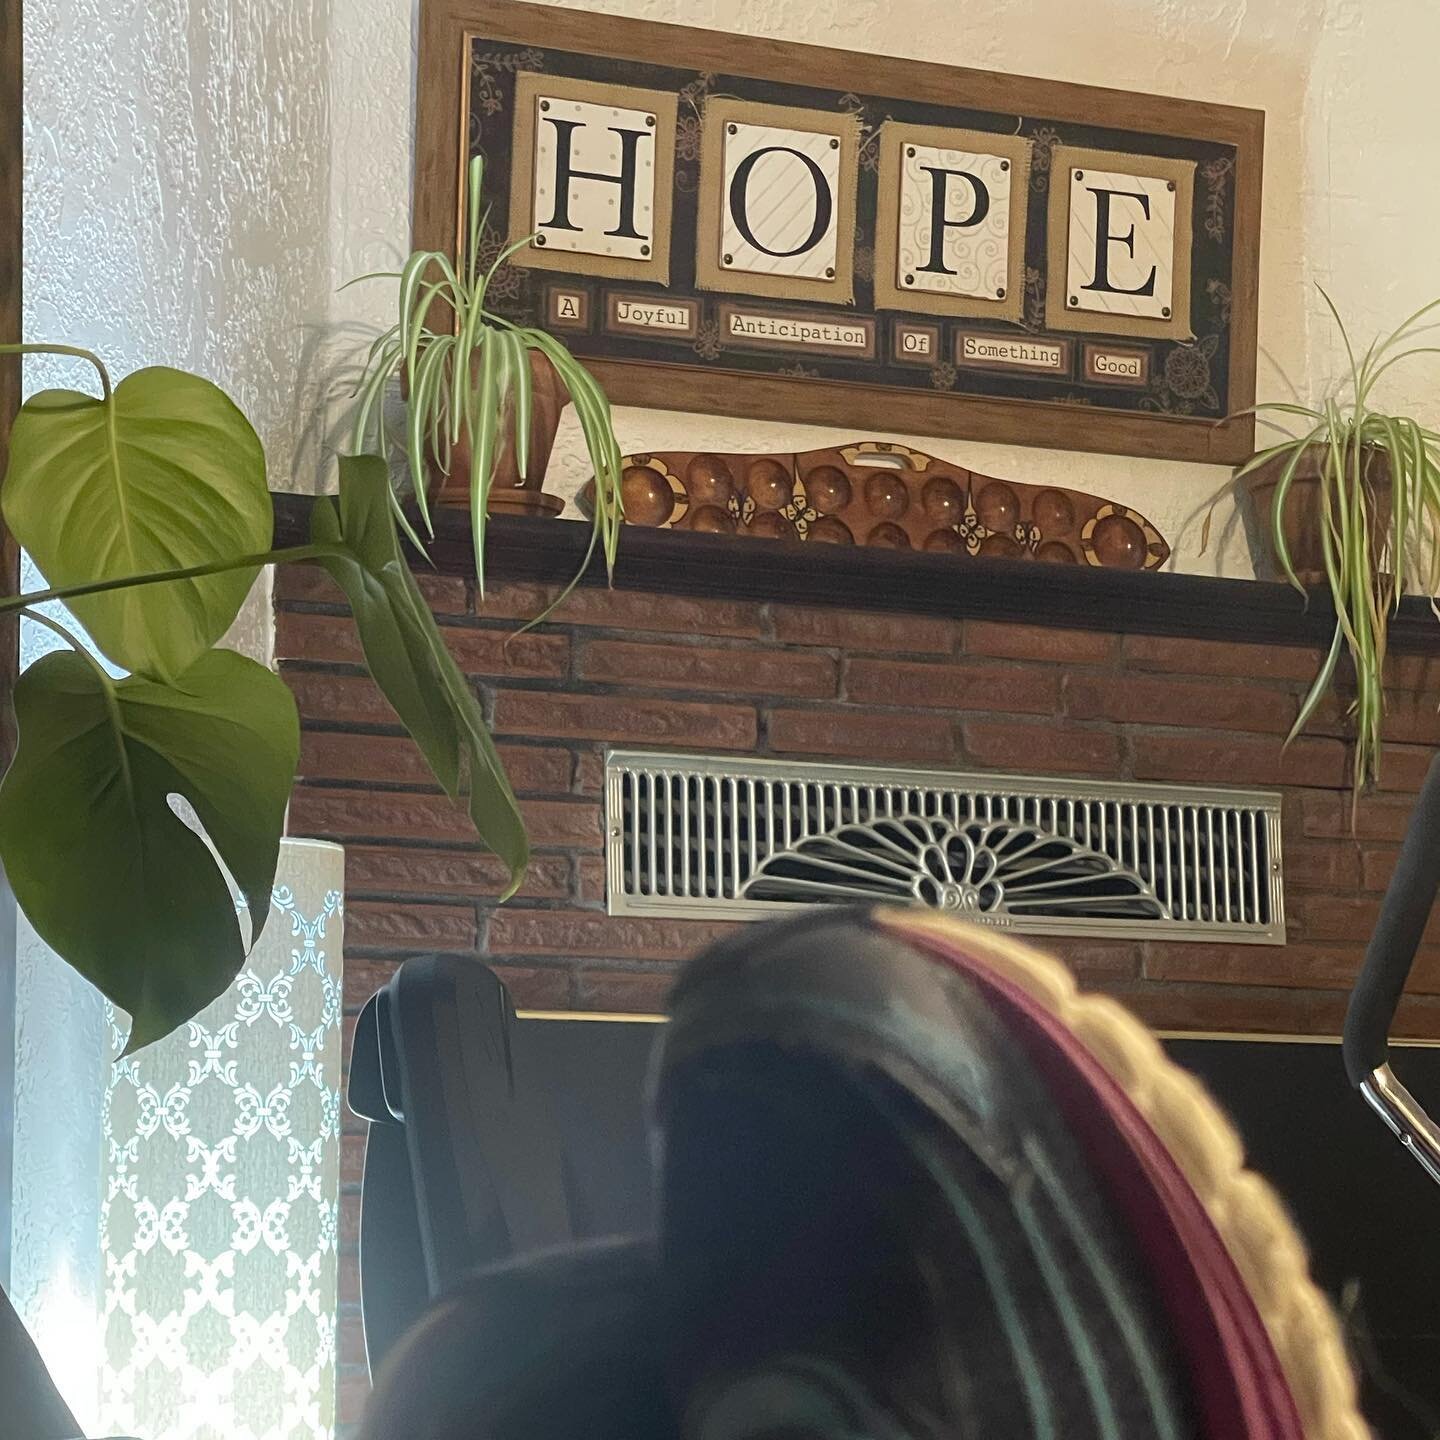 In overwhelming, end-of-the-road hopelessness, the Gift is HOPE. 🎁 

And yes, those are my shoes in the picture! I was just sitting with my feet up, thinking how deafening the sound of silence can be when I spotted hope on the wall. ❤️ How rich is t